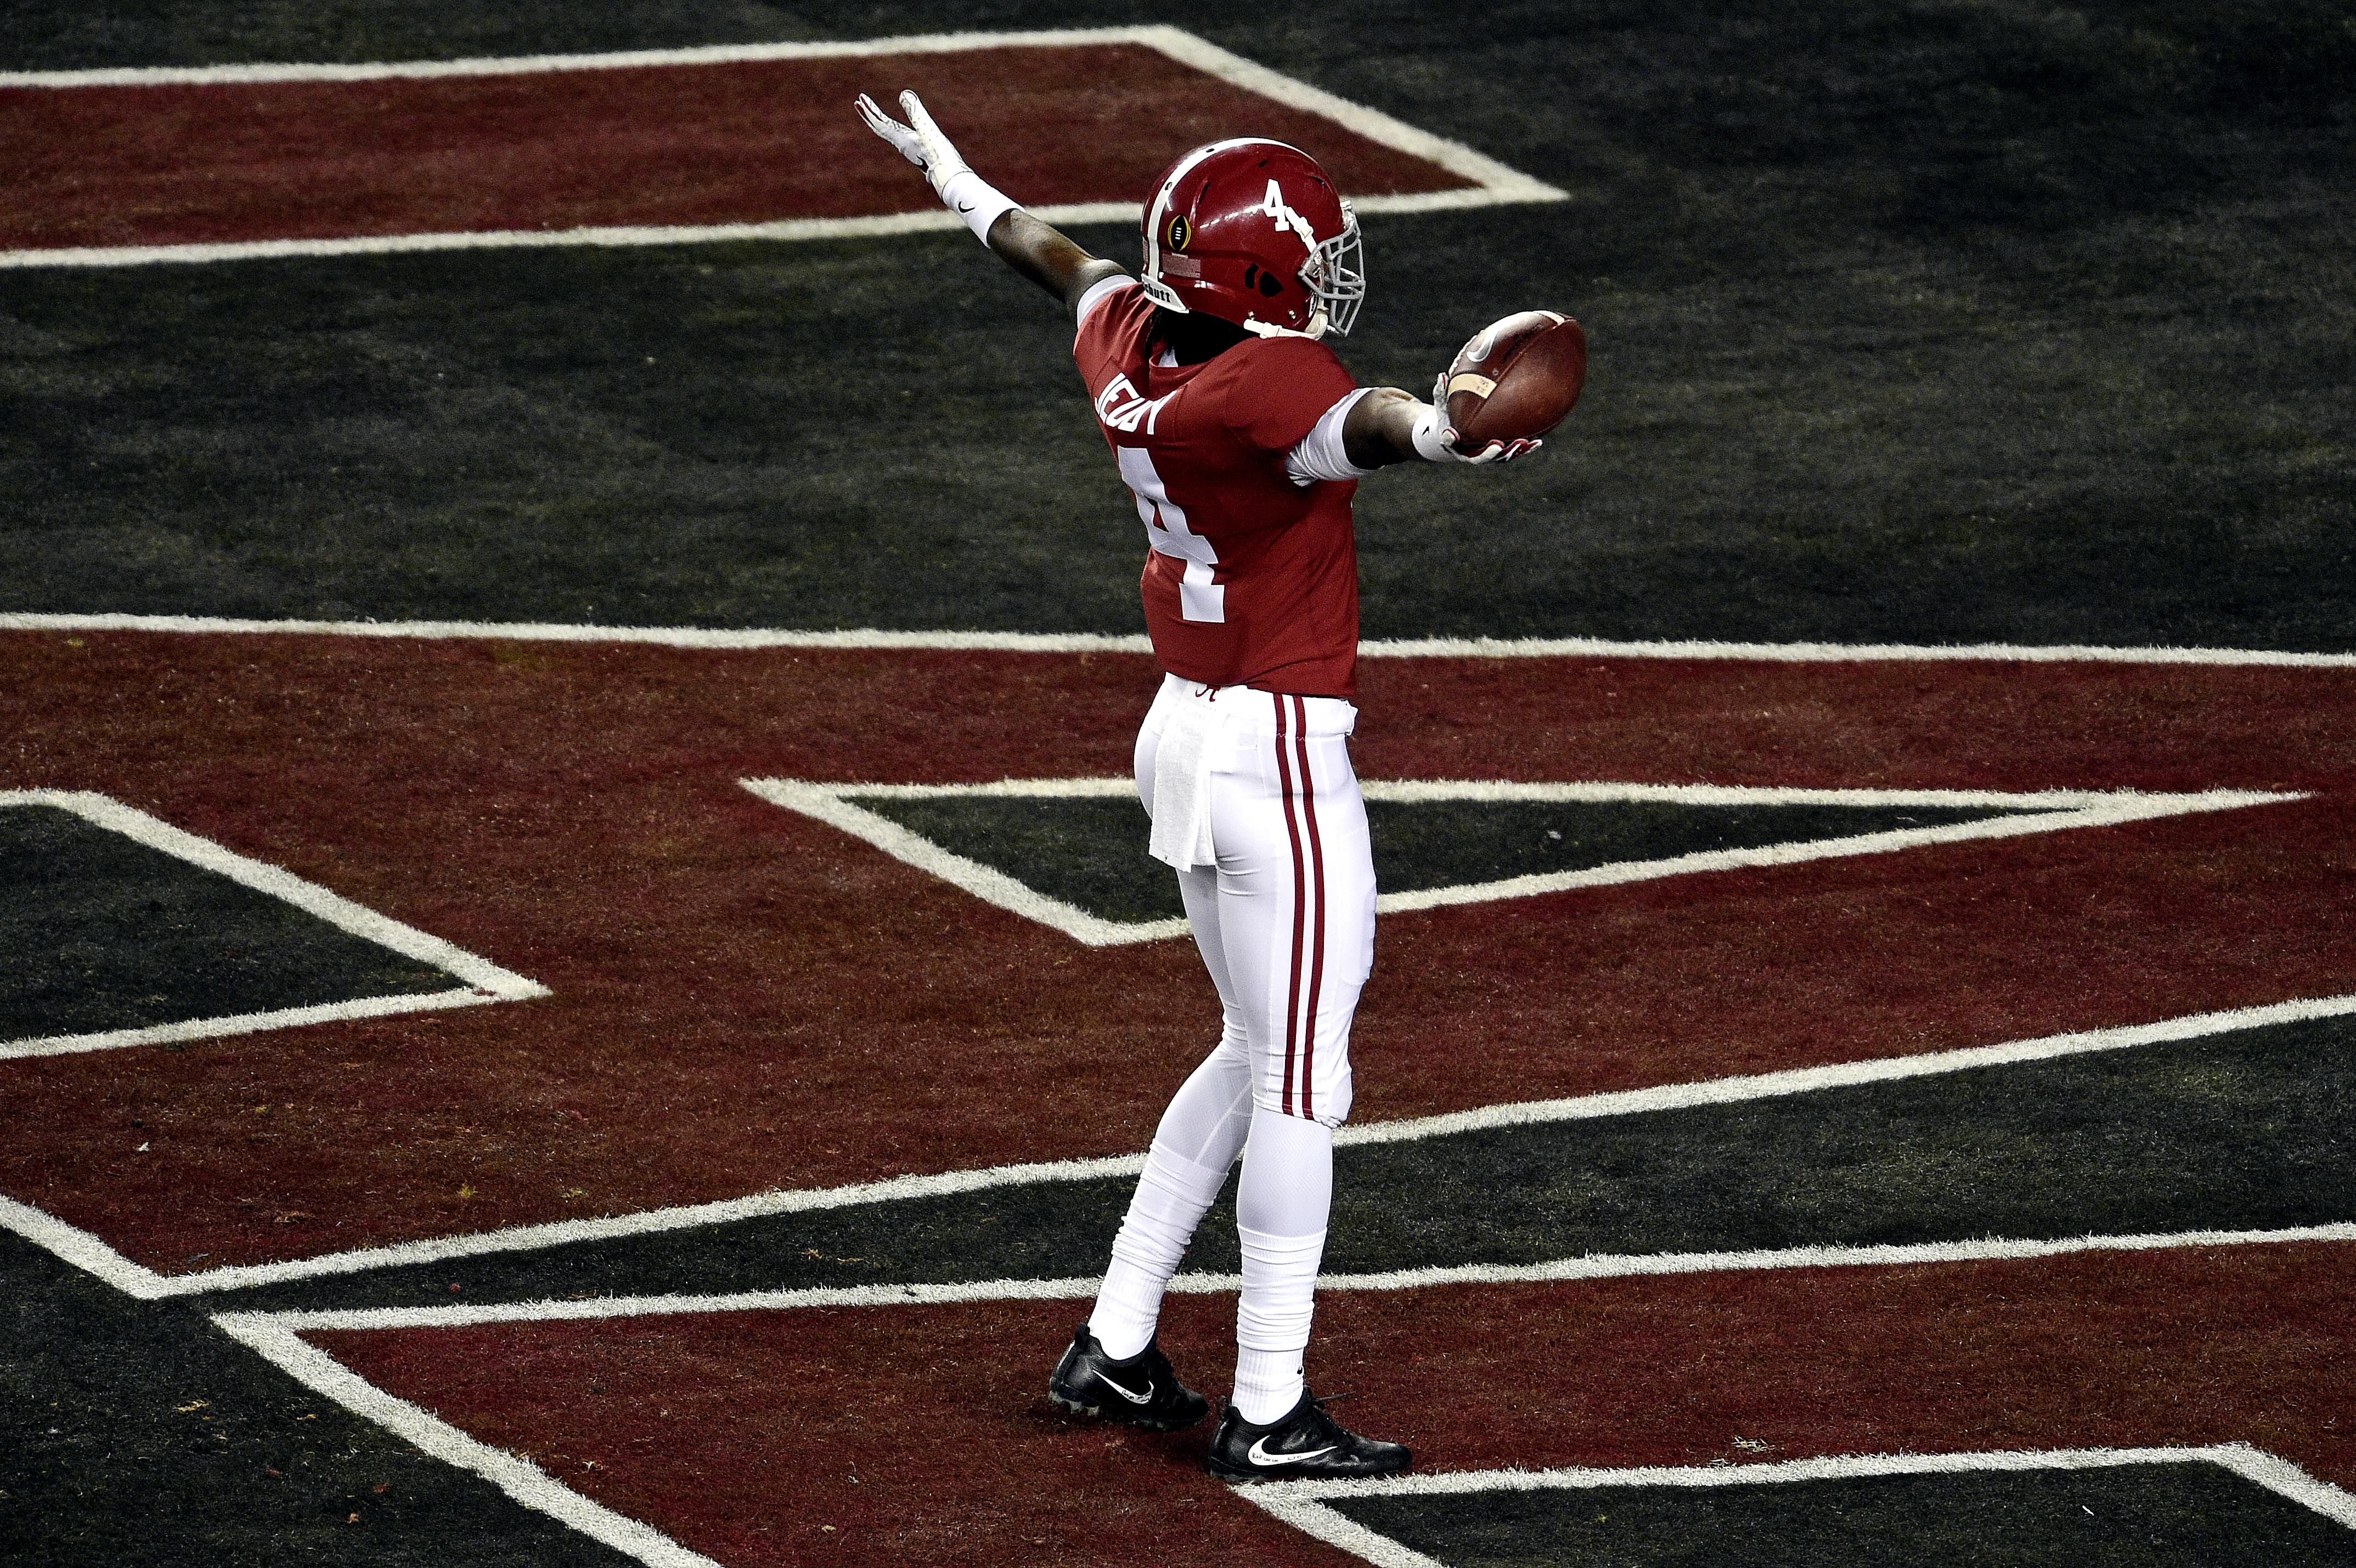 Alabama Crimson Tide wide receiver Jerry Jeudy (4) celebrates a touchdown pass during the first quarter against the Alabama Crimson Tide during the 2019 College Football Playoff